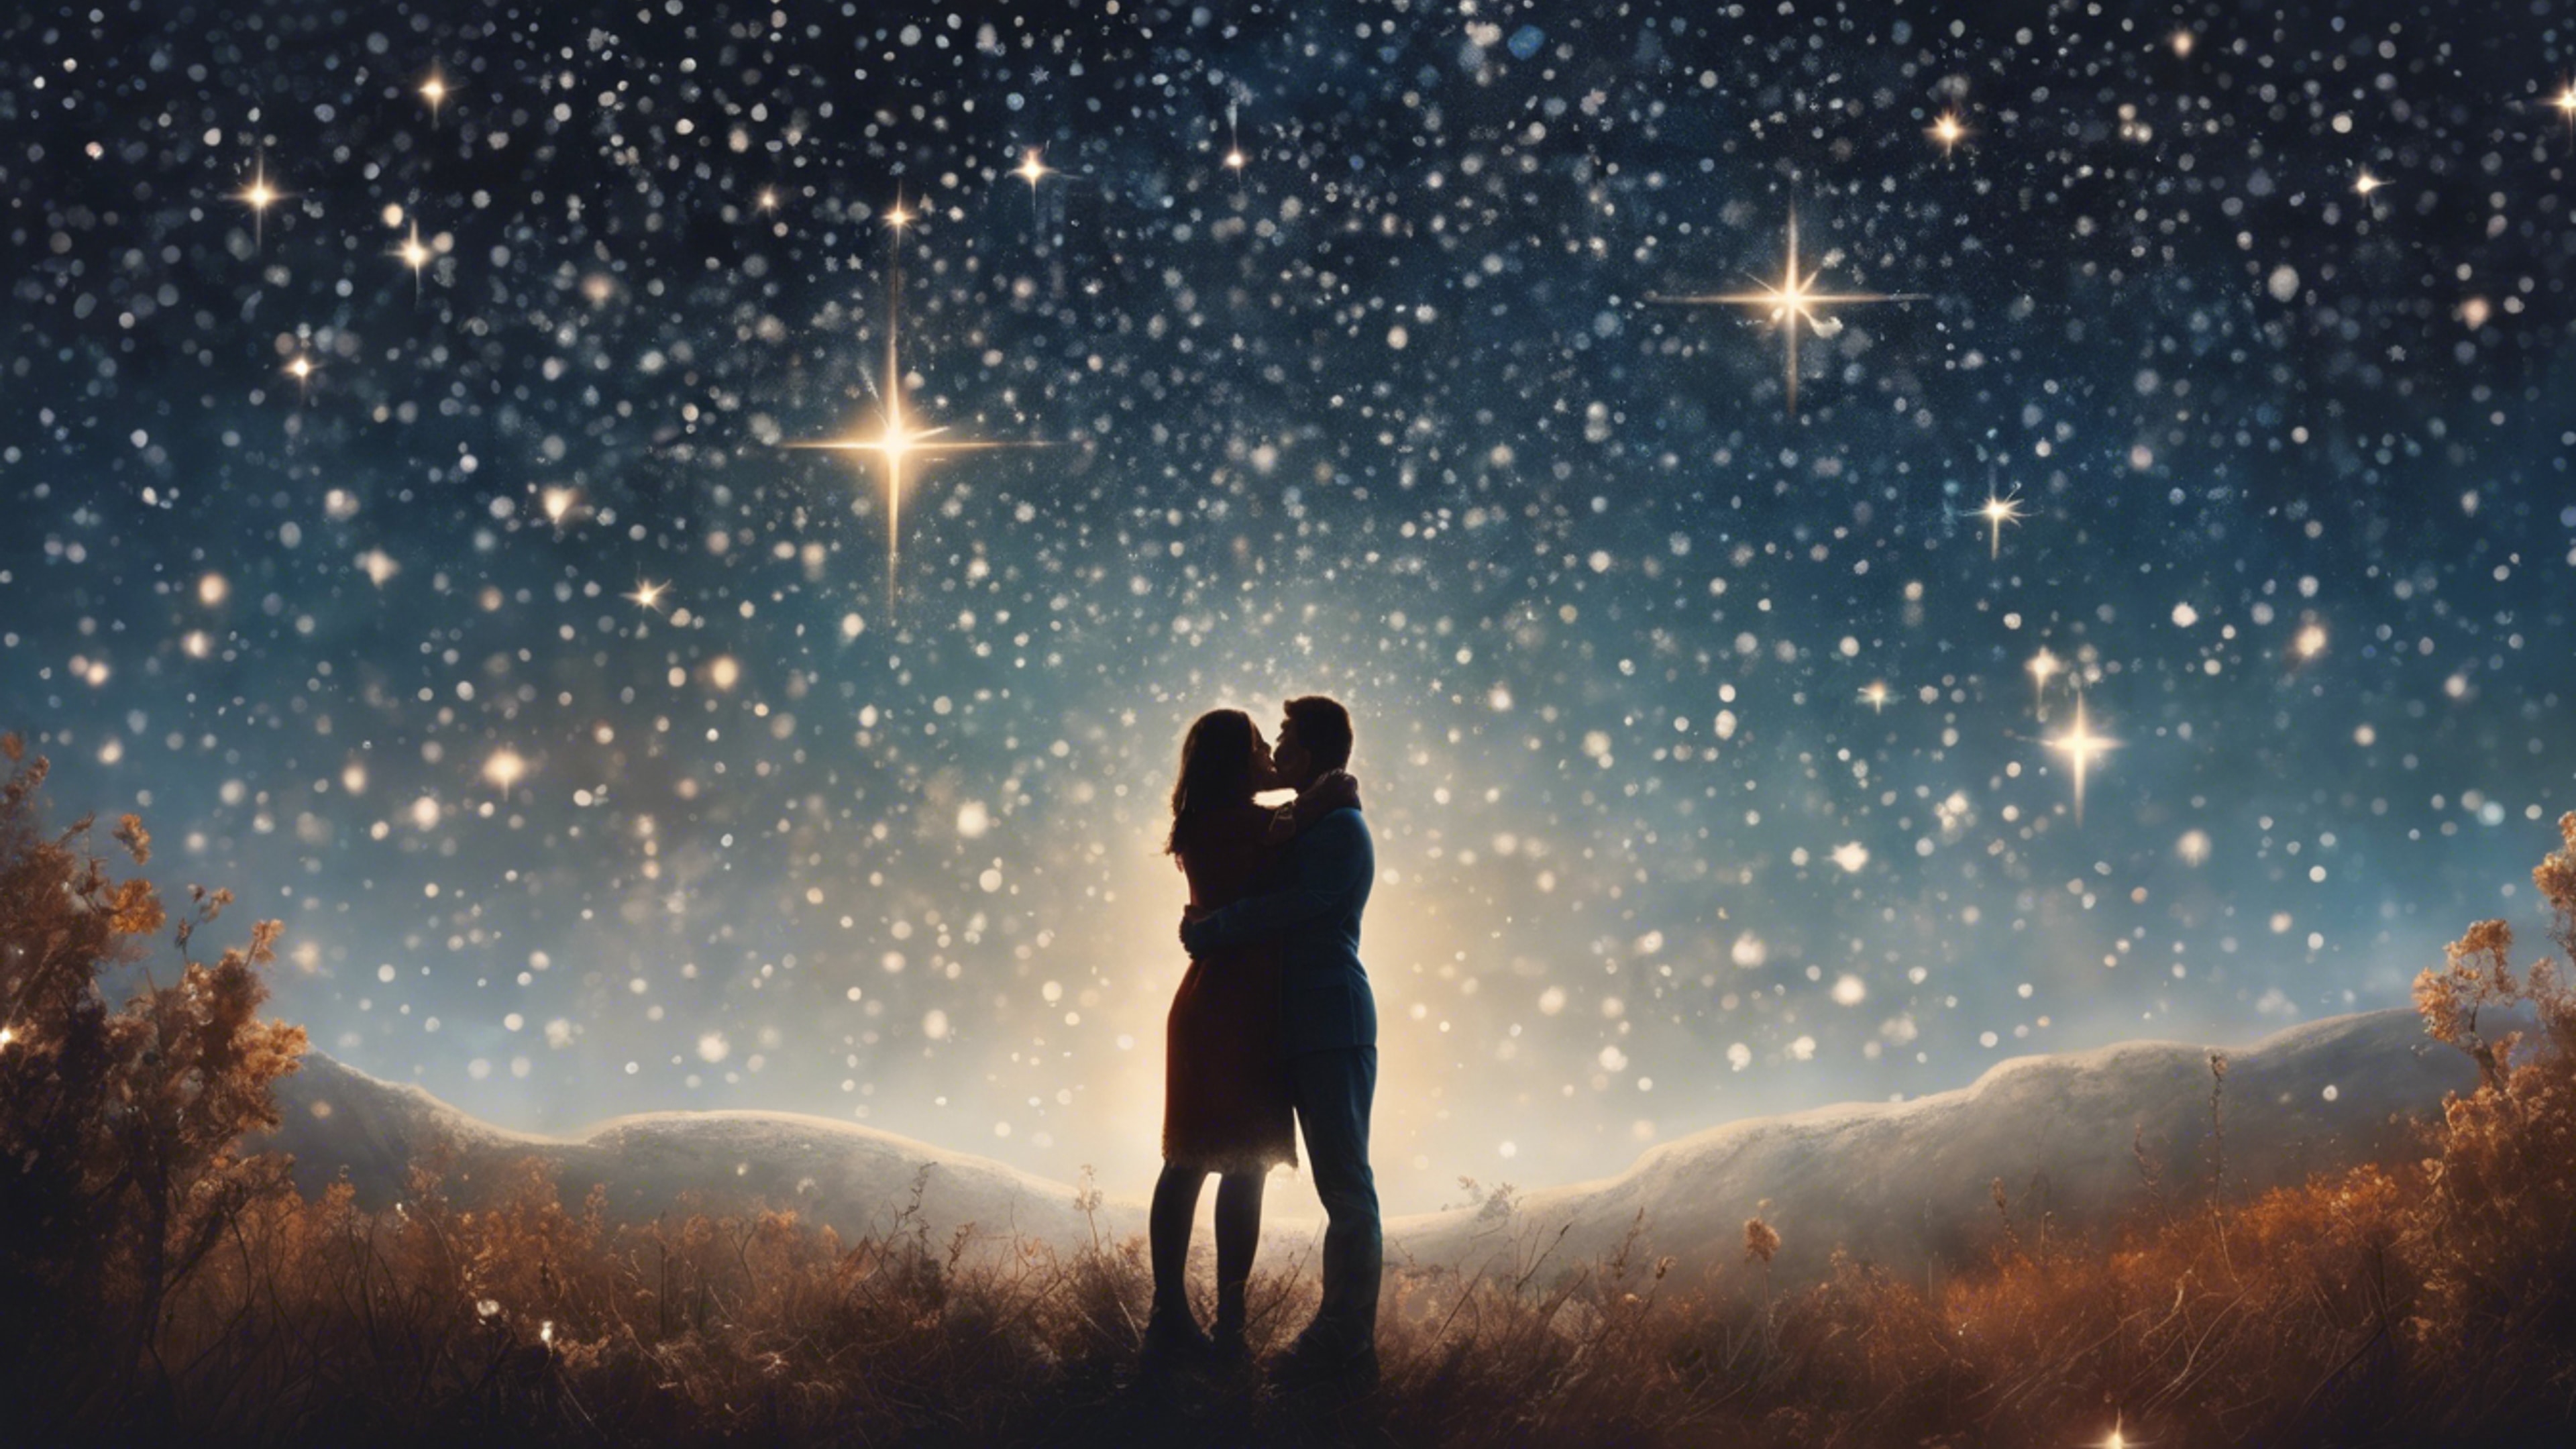 A timeless painting of a couple sharing a romantic moment under a star-filled sky. Tapéta[26fb6f637c3e4c759c8d]